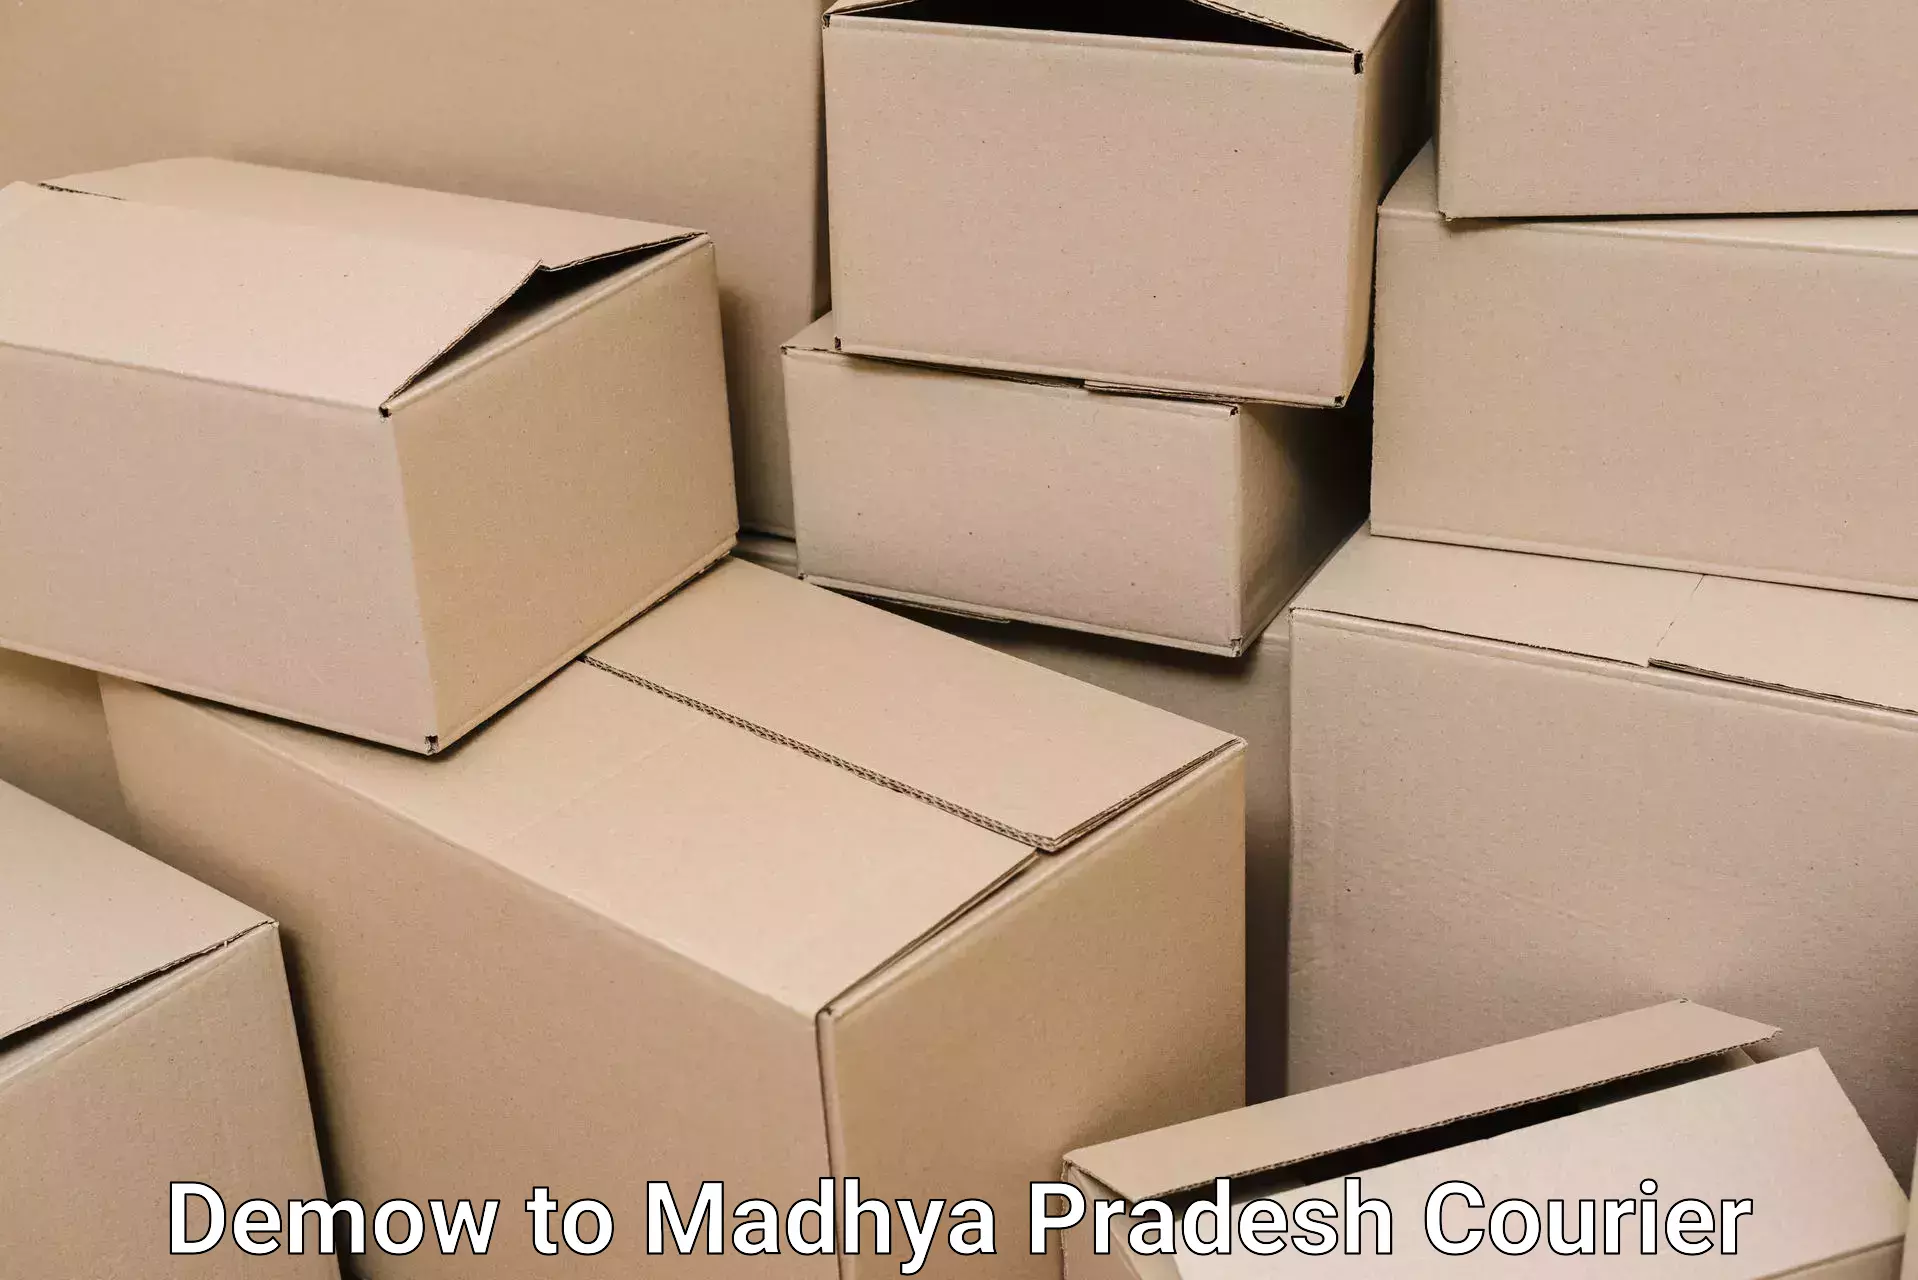 Expert packing and moving Demow to Khargone